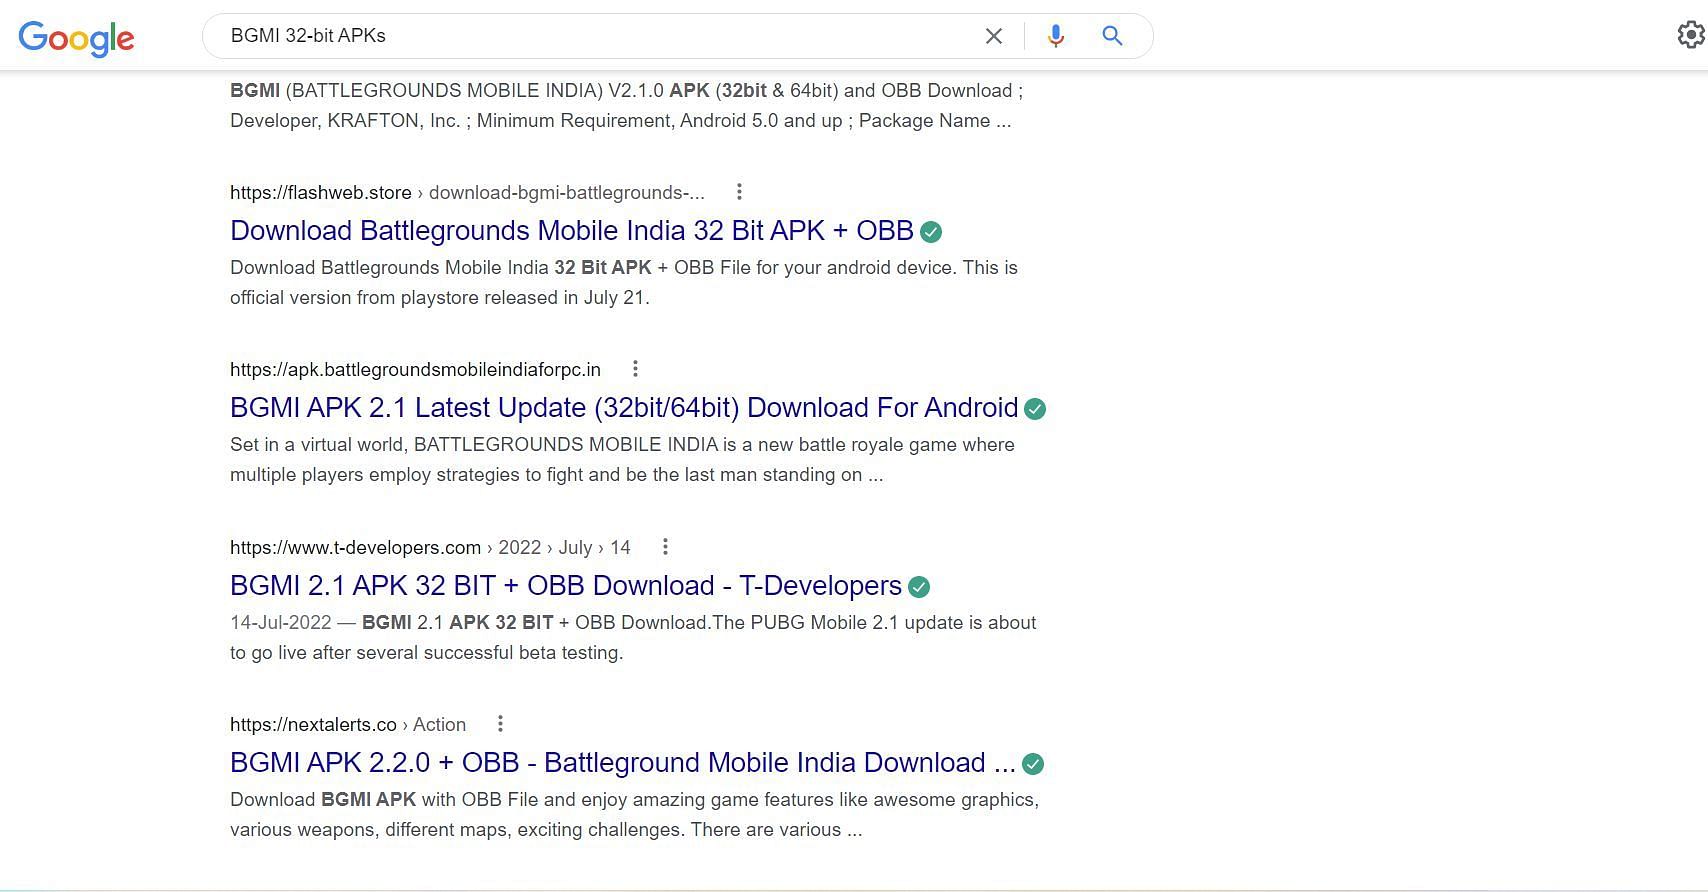 One can stumble upon many fake links for the latest version of BGMI 32-bit APK file. (Image via Google)